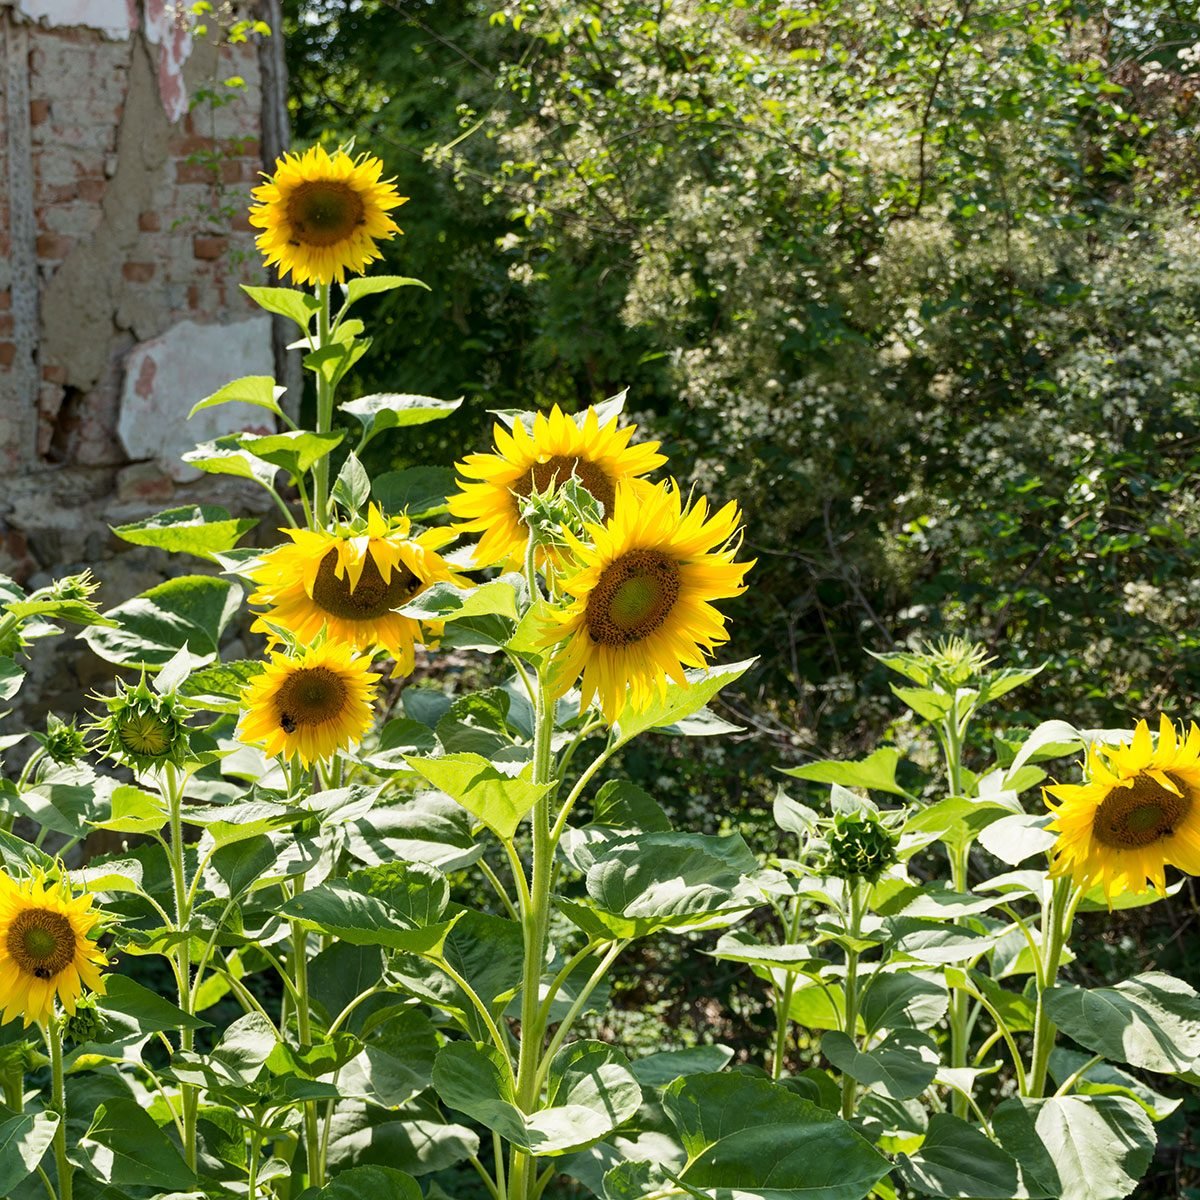 What To Know About Growing Sunflowers From Seeds